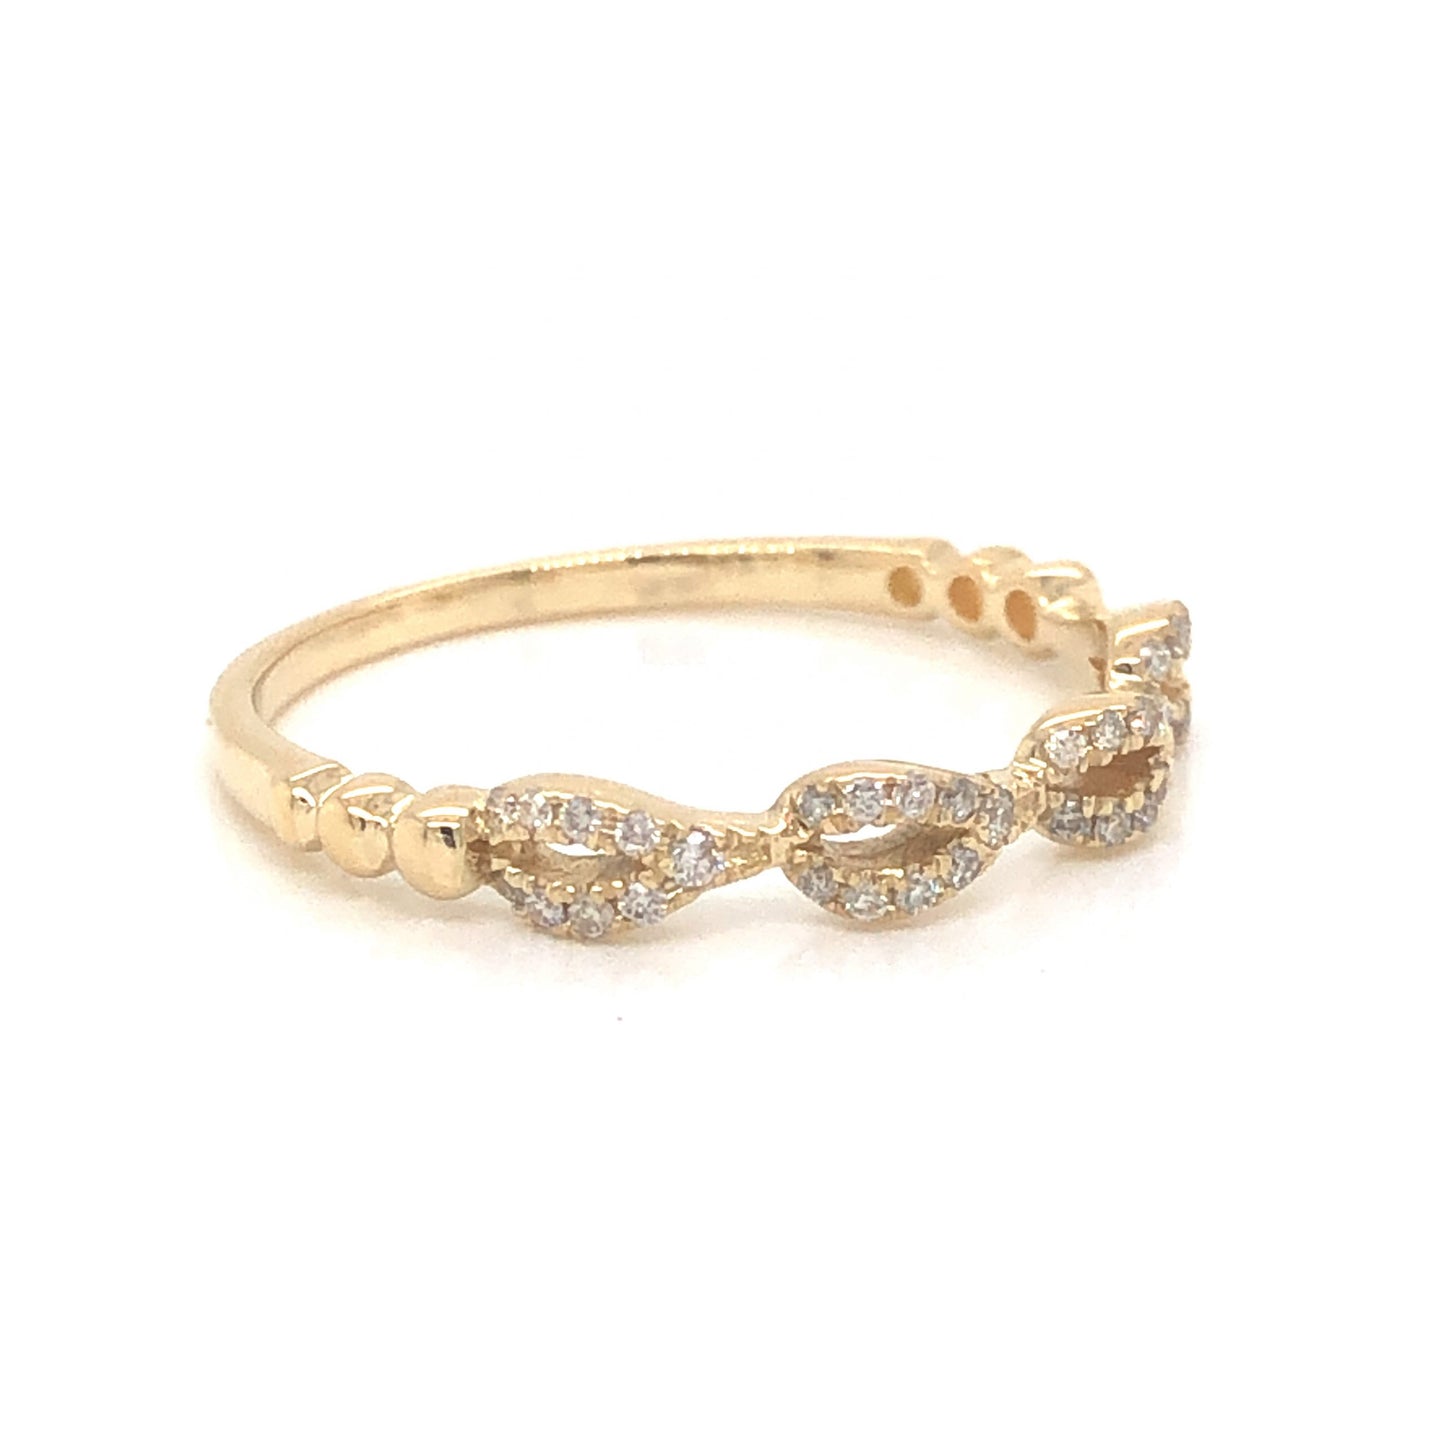 .13 Pave Diamond Wedding Band in 14k Yellow Gold